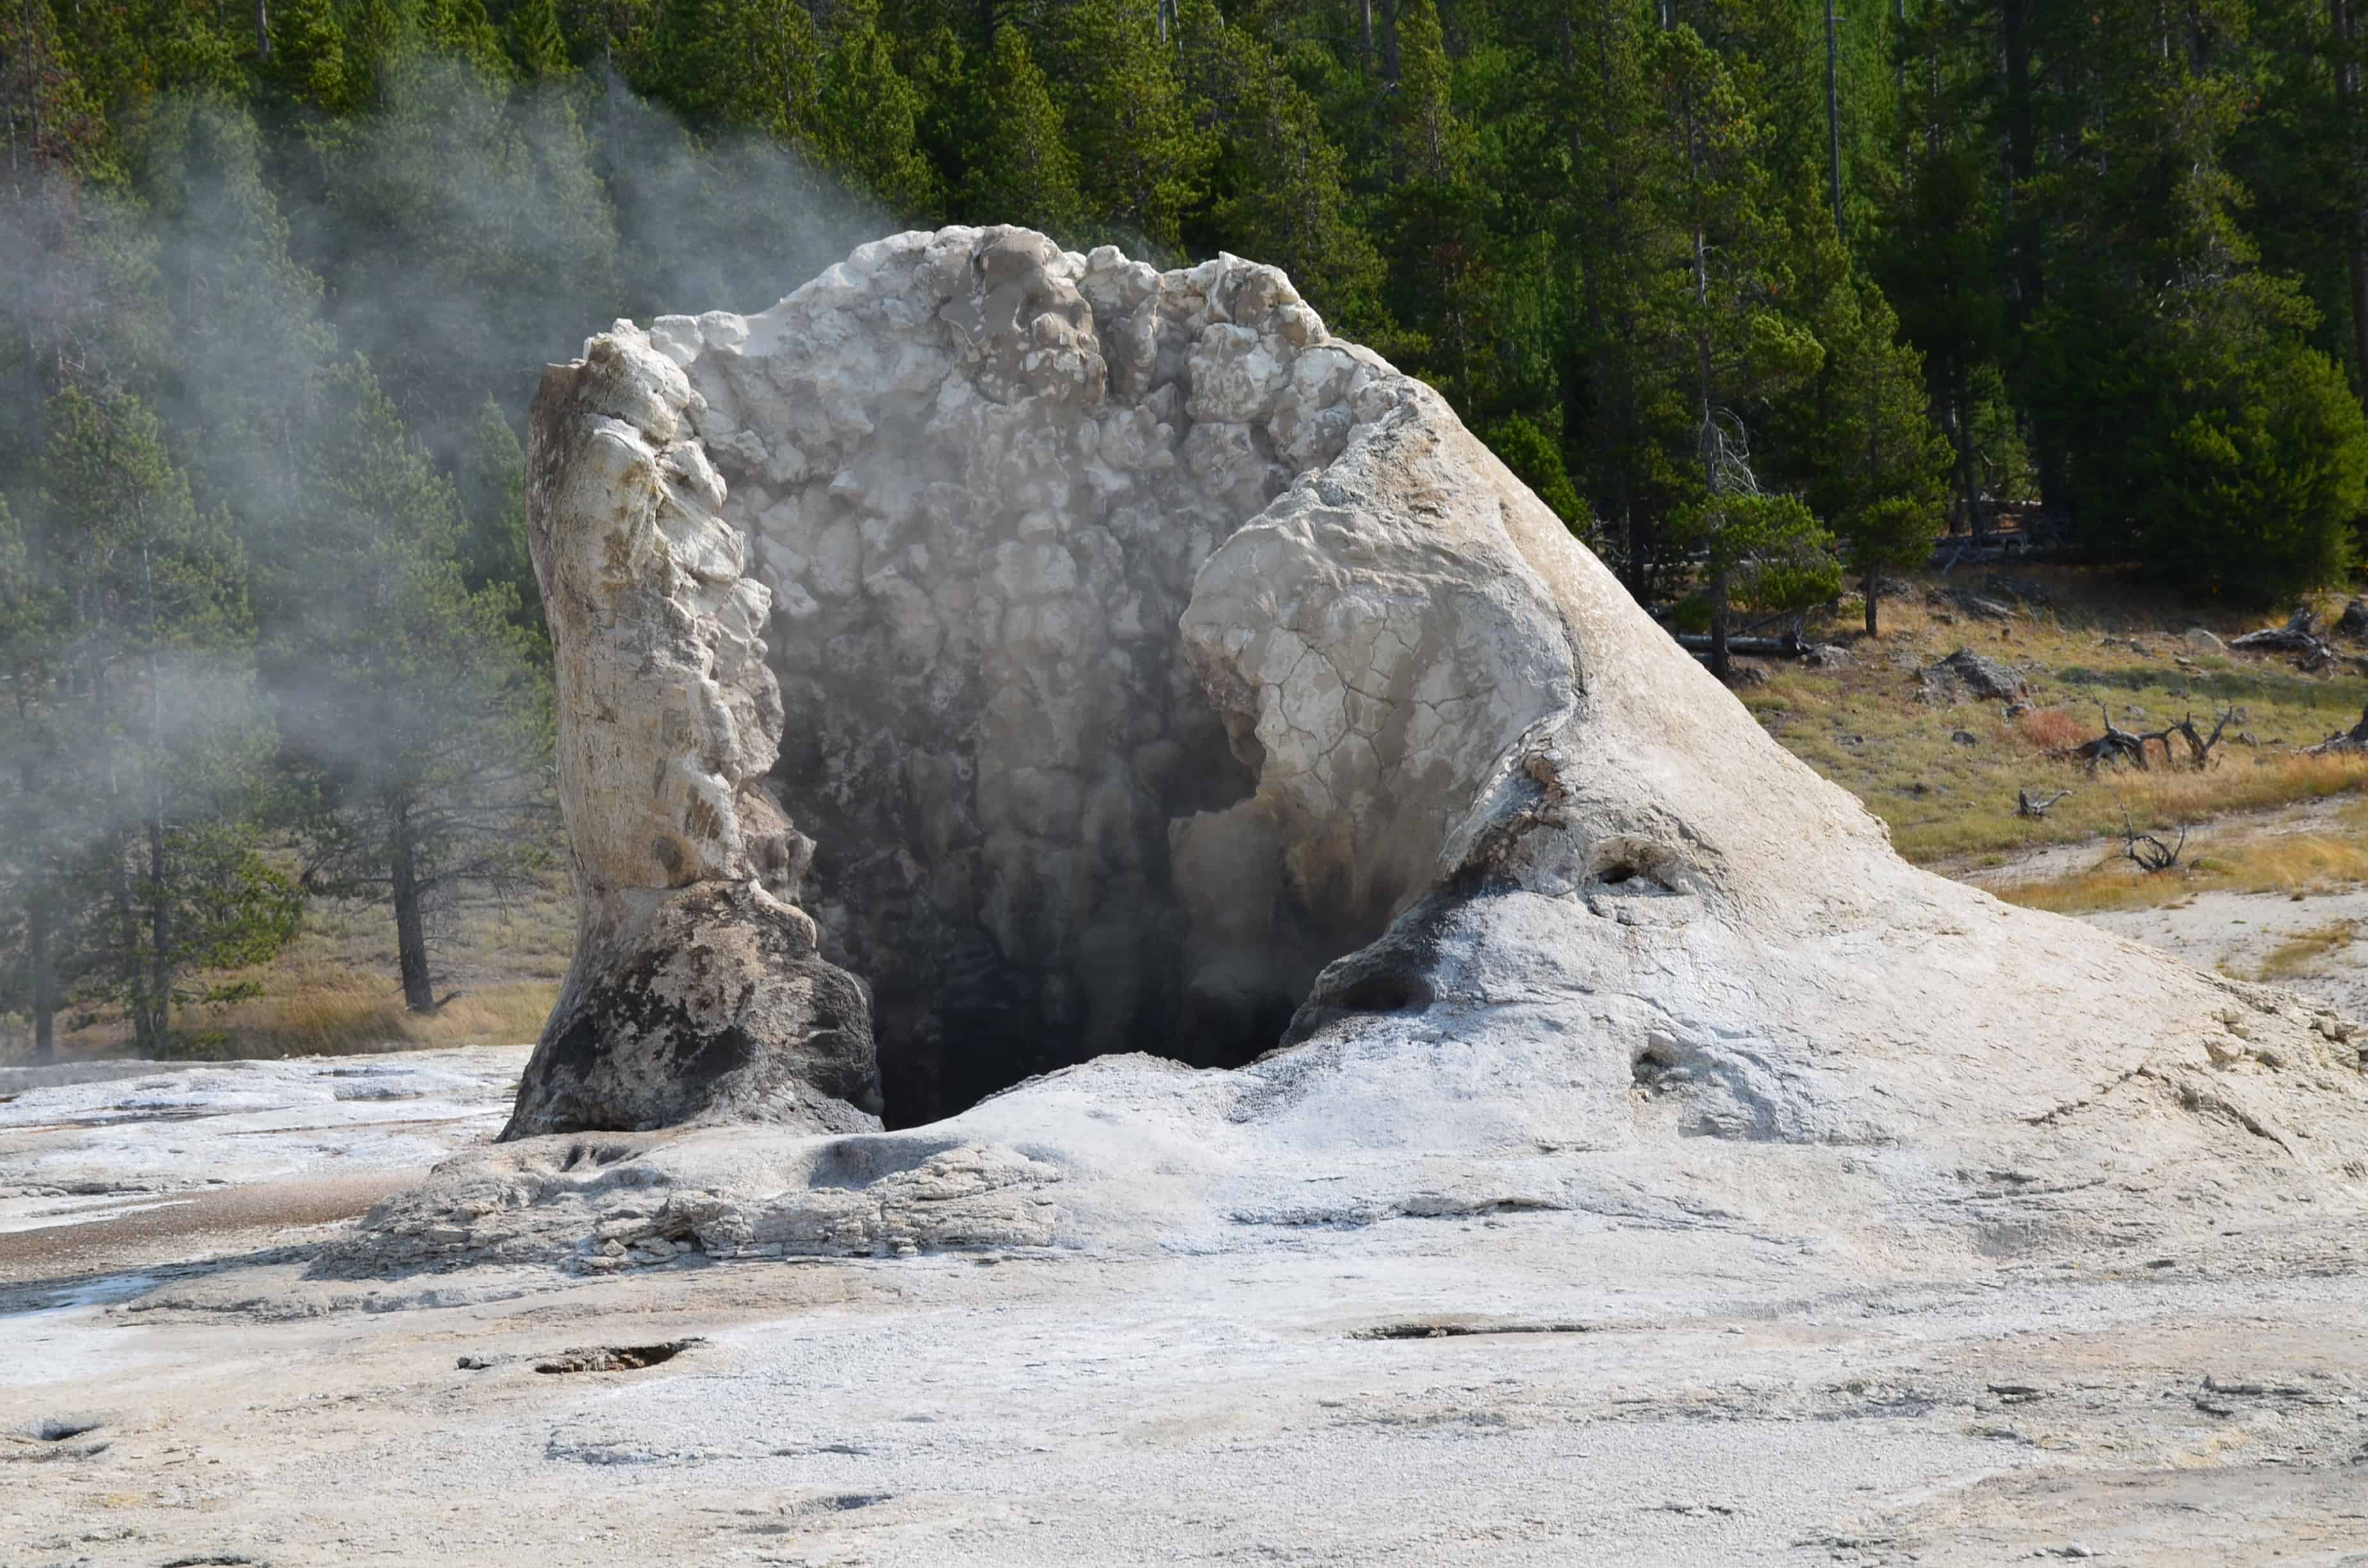 Giant Geyser at the Upper Geyser Basin in Yellowstone National Park, Wyoming